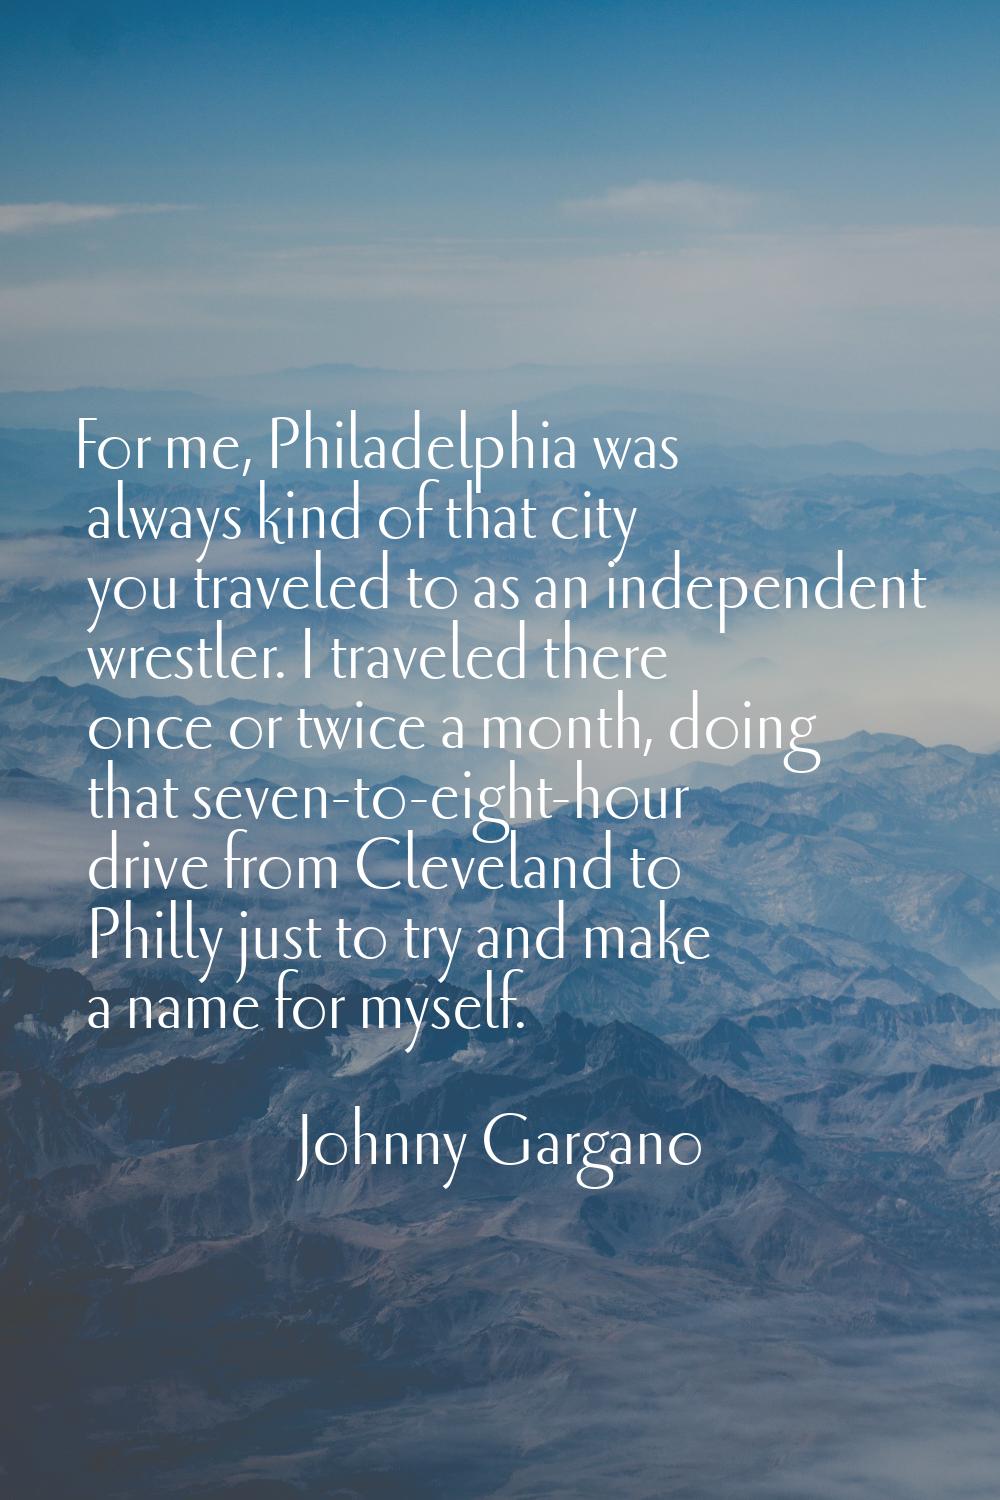 For me, Philadelphia was always kind of that city you traveled to as an independent wrestler. I tra